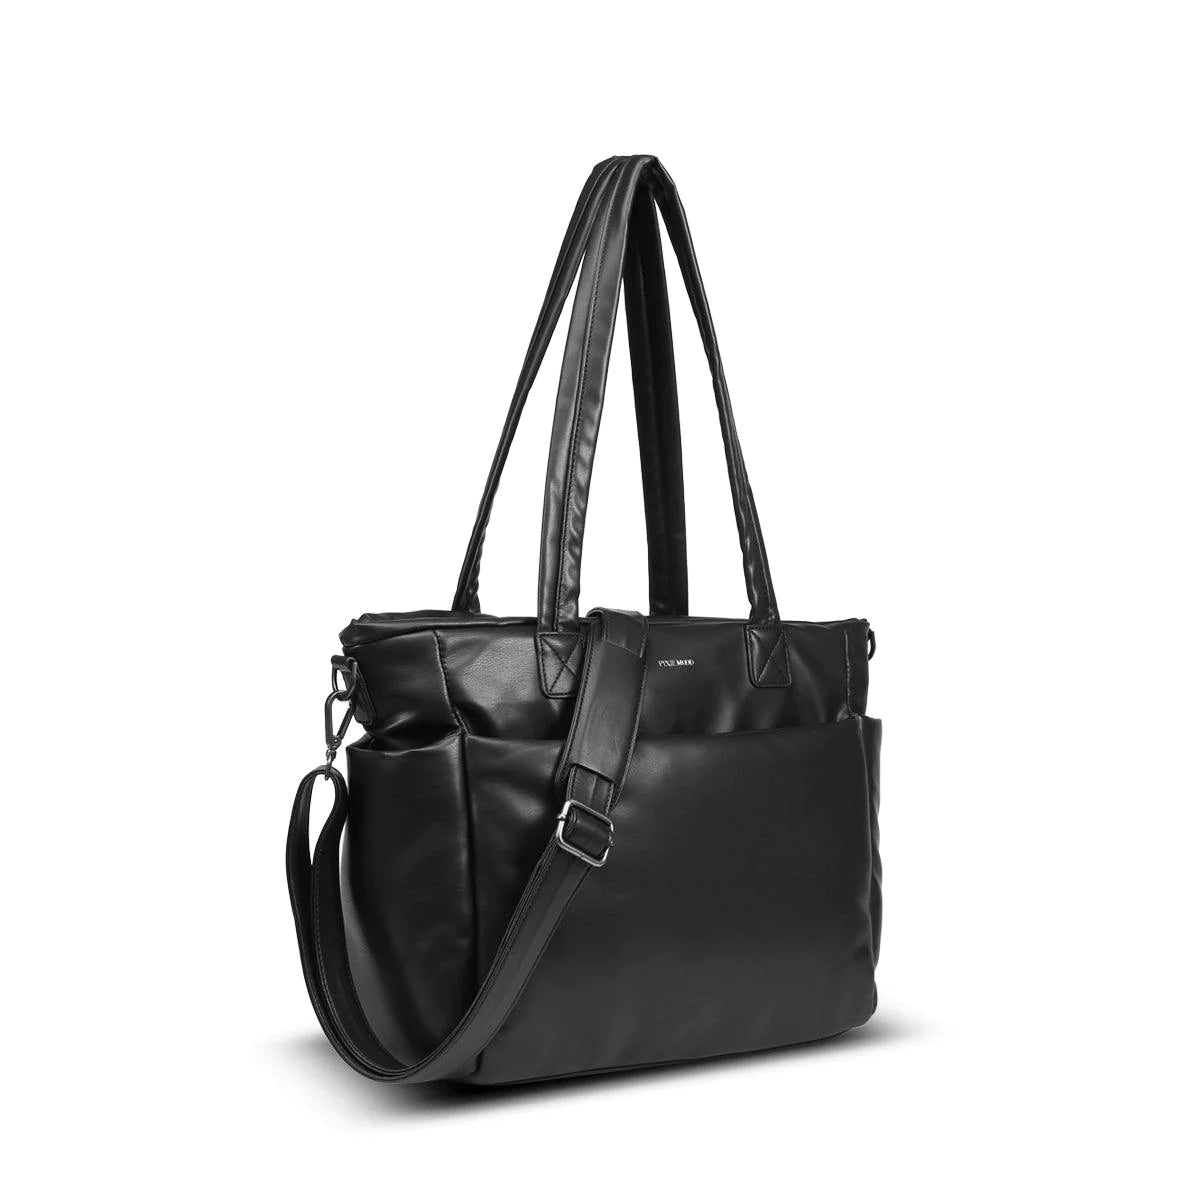 Pixie Mood Bubbly Tote